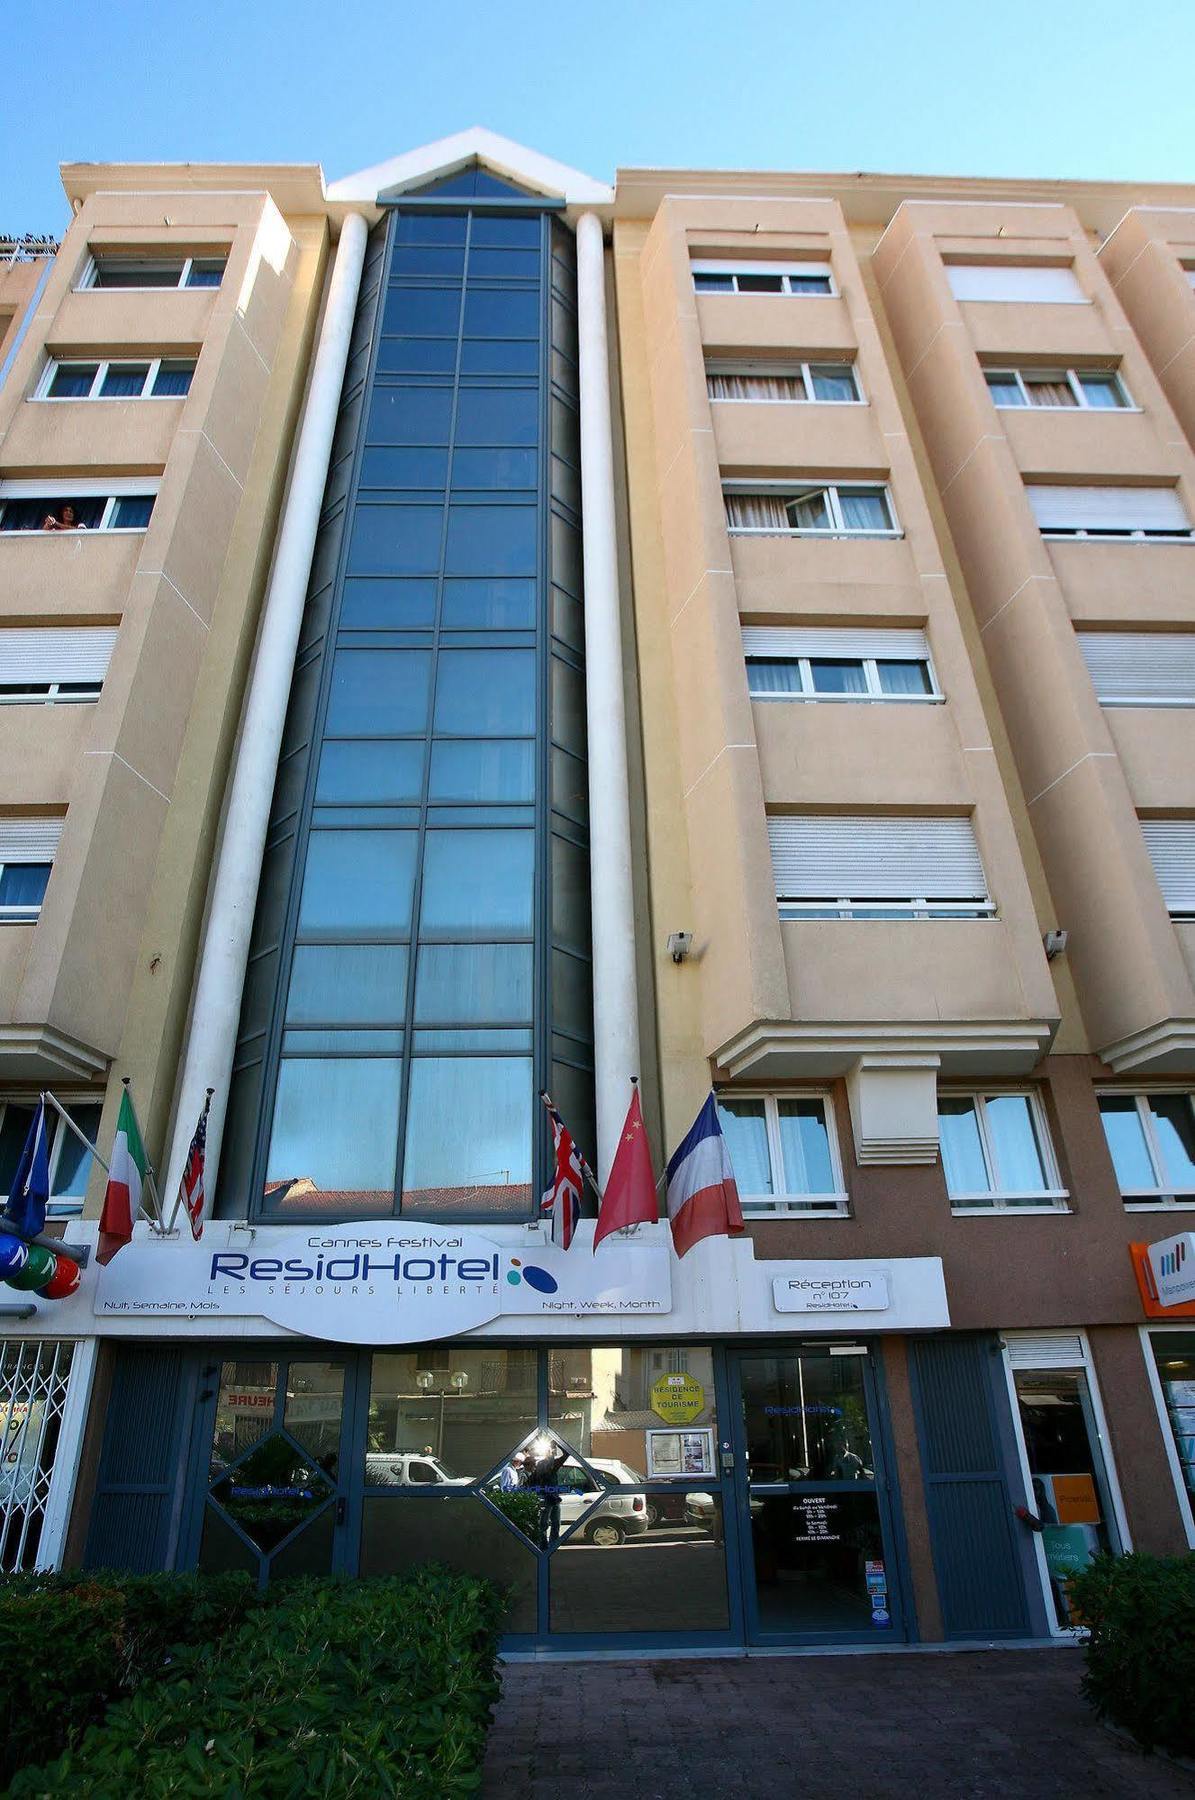 Residhotel Cannes Festival Exterior foto